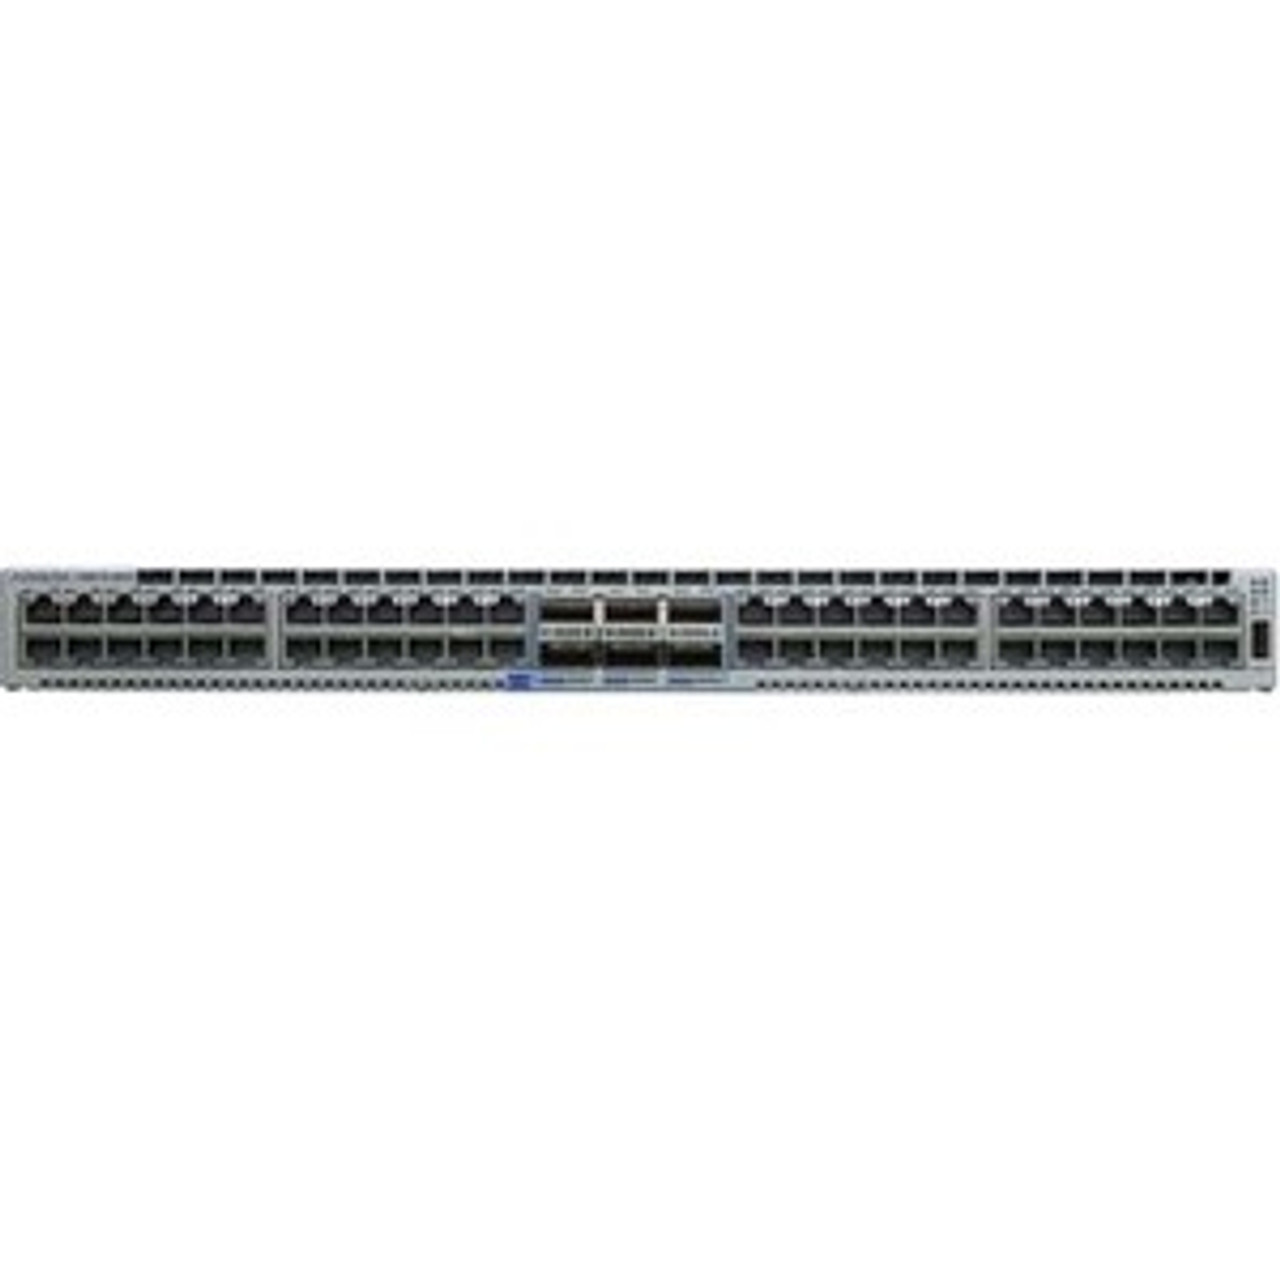 DCS-7280TRA-48C6-F Arista Networks 7280TRA-48C6 Ethernet Switch - 48 Ports - Manageable - 3 Layer Supported - Modular - Optical Fiber, Twisted Pair - 1U High - 